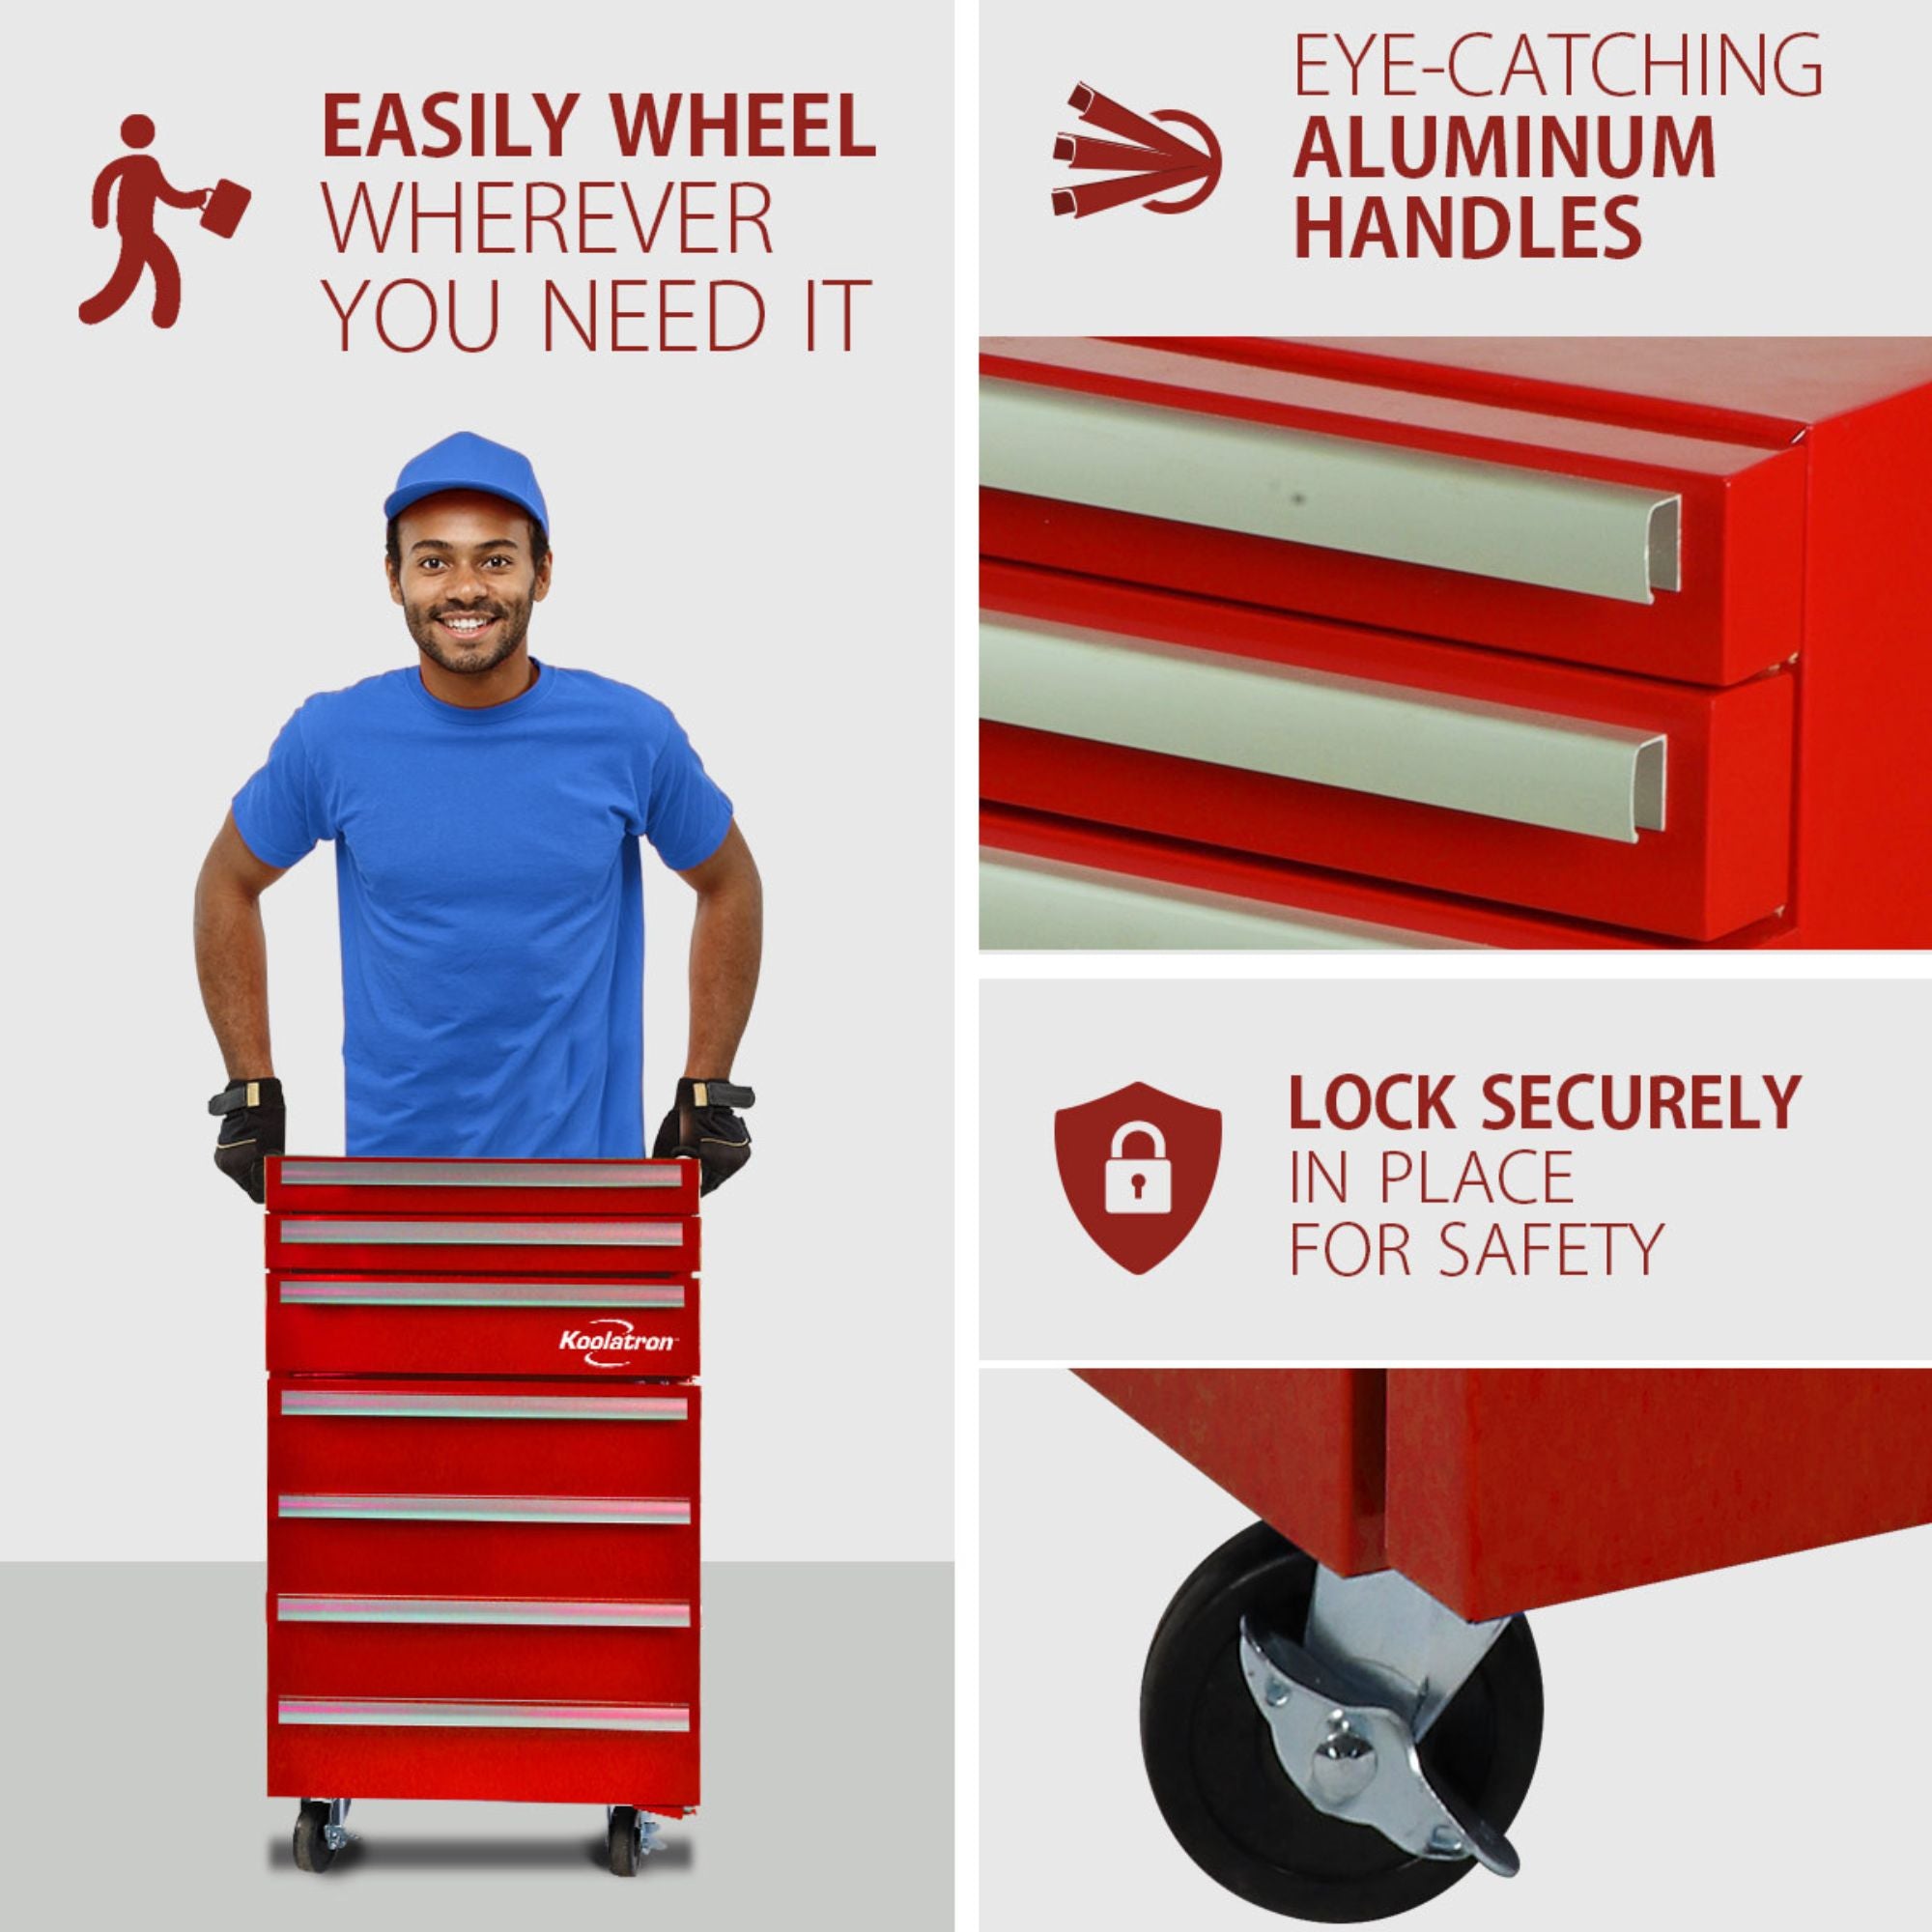 Left side shows a lifestyle image of a person with brown skin and short black hair and beard wearing a bright blue t-shirt and hat and black work gloves standing behind the toolchest fridge and holding onto the sides. Text above reads, "Easily wheel wherever you need it. Right side shows two closeup images, labeled, of the eye-catching aluminum handles and swivel wheels that lock securely in place for safety.